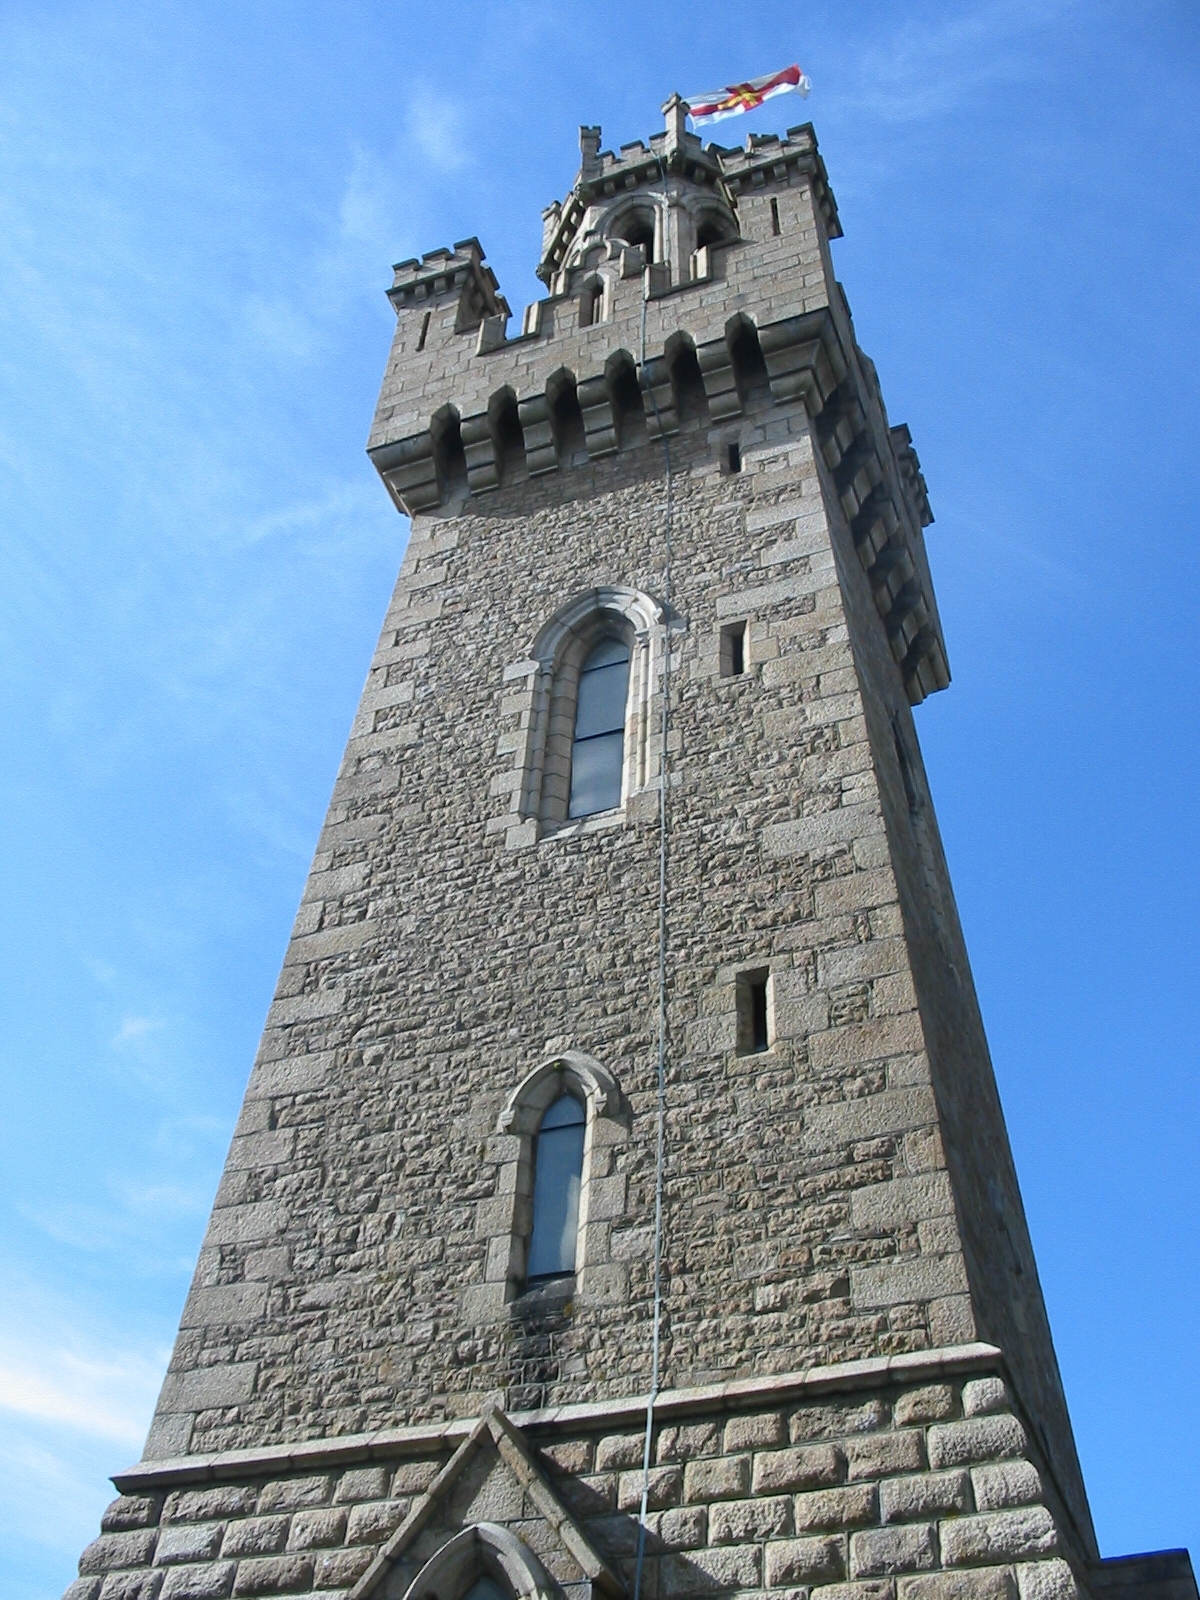 File:Victoria Tower St Peter Port Guernsey.jpg - Wikimedia Commons